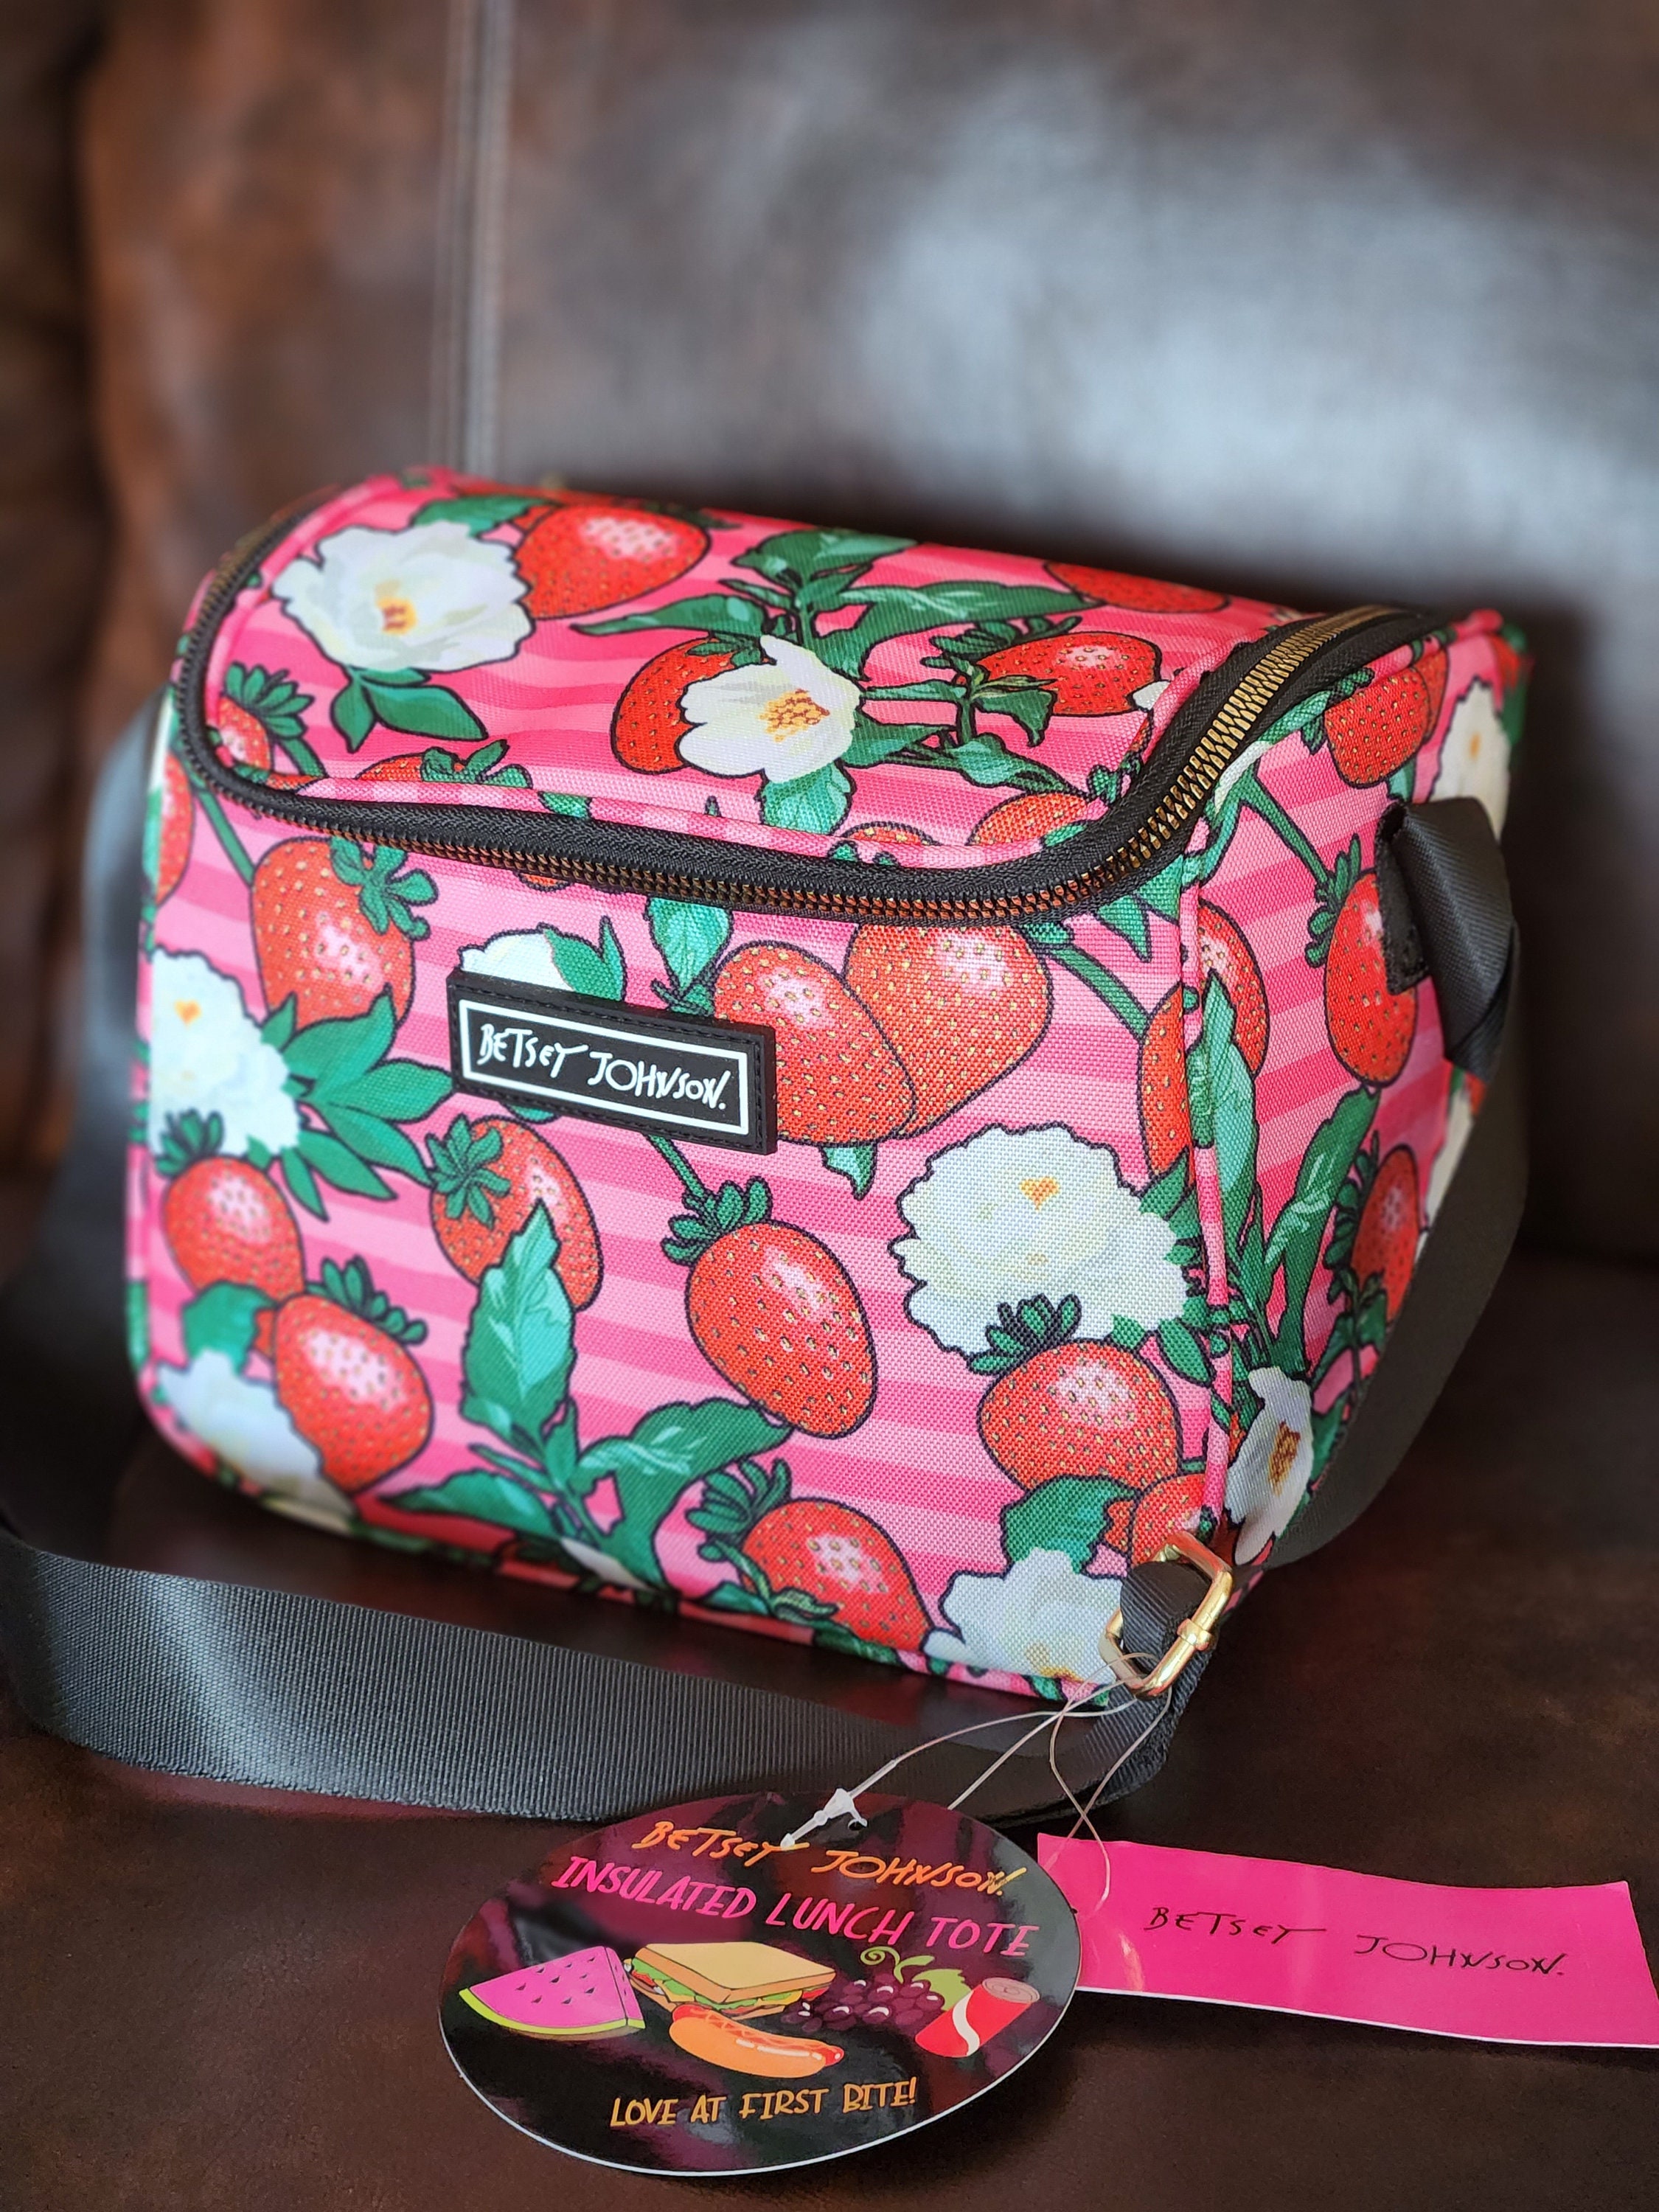 Betsey Johnson Cube Lunch Tote Strawberry Cooler Bag Picnic - Etsy